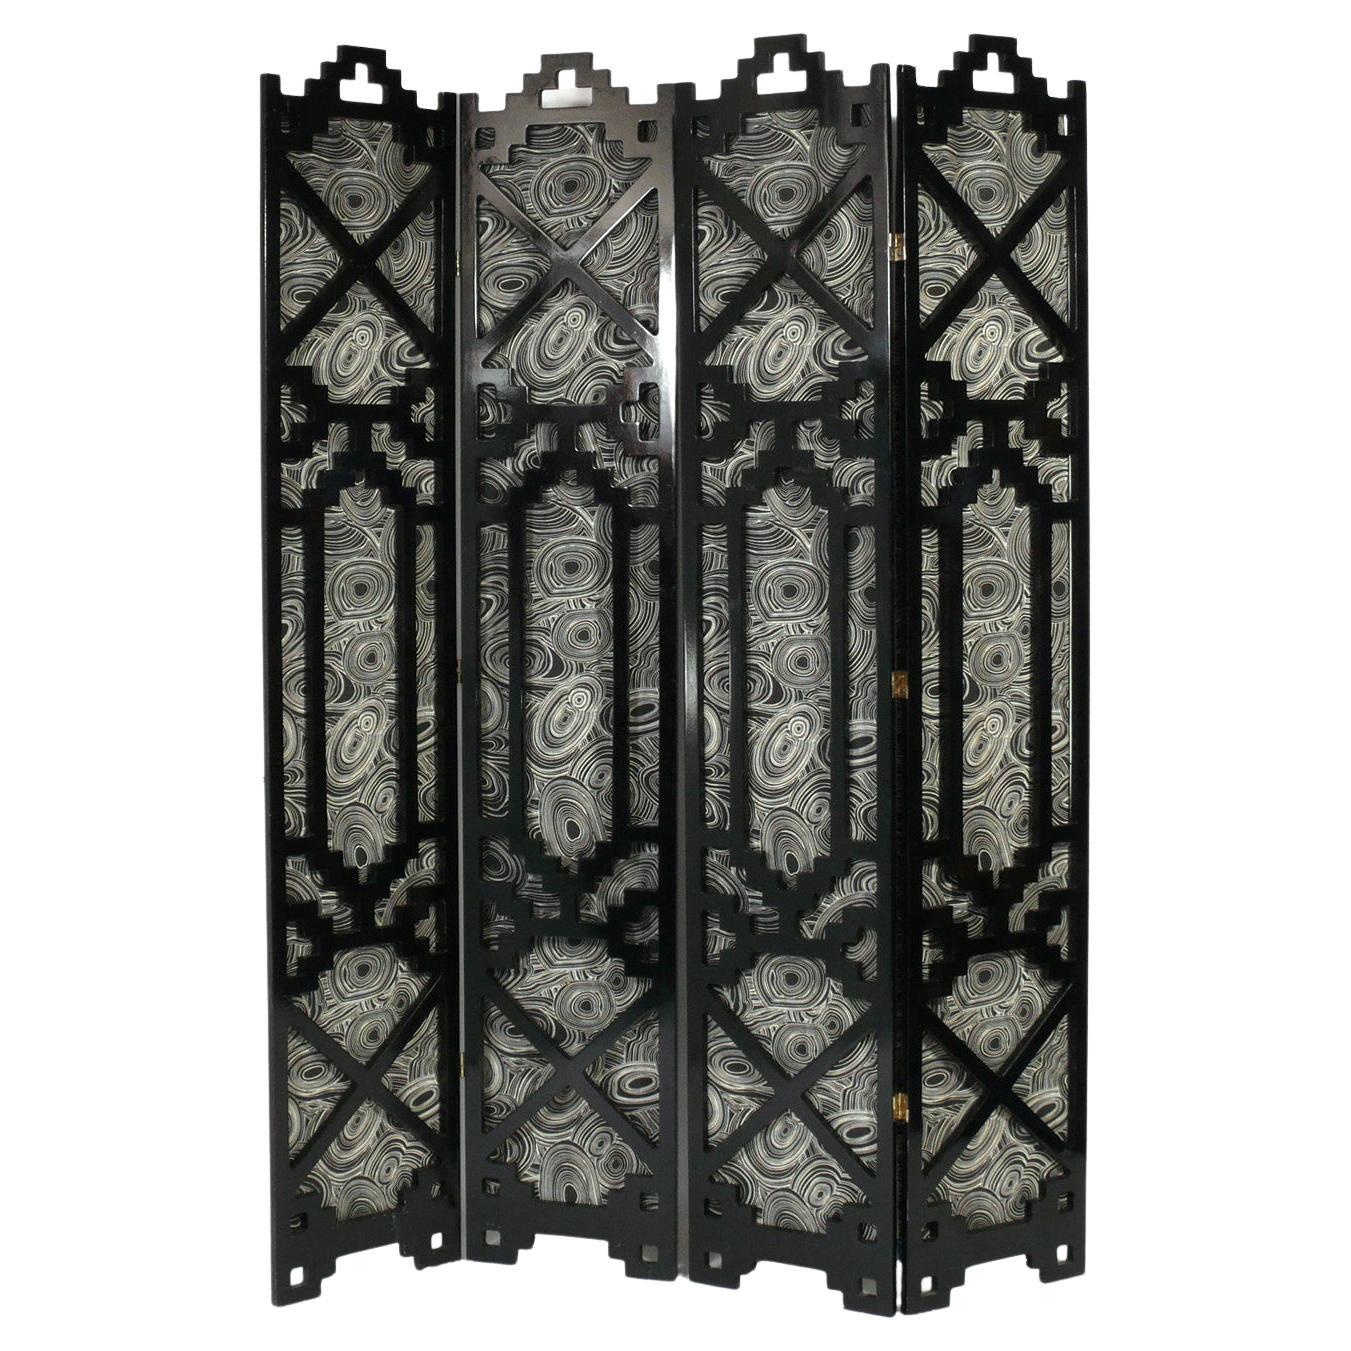 Asian Black Lacquer Folding Screen or Room Divider